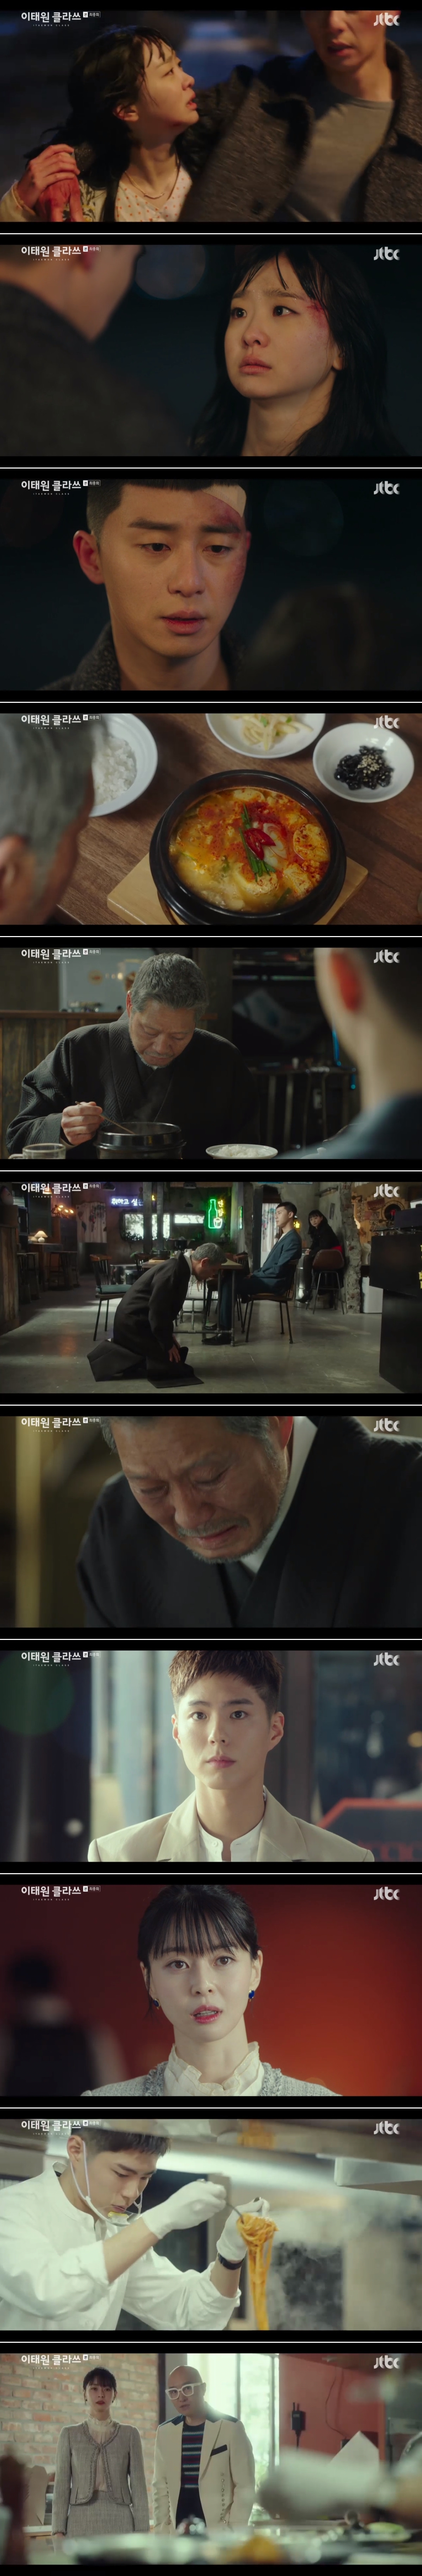 In JTBCs Itaewon Clath (director Kim Sung-yoon, playwright Cho Kwang-jin), which was broadcast on the afternoon of the 21st, Park fell to his knees in front of Jang Dae-hee to find out where Joe-yool Lee (Kim Da-mi) is.Jang Dae-hee laughed, Why are you doing this? Where are you going? You kneel at this job. It is not like you are being pushed by power.So Park said, Ive been living with vengeance, and this man, Jang Dae-hee, was both the enemy and the great man who drove my life to hell.I thought it was worth it so far, and I feel sorry for the time that a man like that tried to catch up with an ugly old man who was kneeling against a hostage. The embattled Joe-yool Lee fled after telling Jang Geun-soo (played by Kim Dong-hee) to leave the iron pipe and cheer up; Jang Geun-soo was embarrassed and swung the iron pipe, saying, Im trying to cheer up.Kim Hee-hoon (Won Hyun-joon) shouted, Stop giving up, I can not run anyway. But Joe-yol Lee continued, Give up on you, you loser.At the same time, Roy ran to save Joe-yool Lee with Choi Seung-kwon (Ryu Kyong-su) and found Joe-yool Lee.On the other side, a car was running with Jean and Kim Hee-hoon, who ordered Choi to Park and the two rushed.But eventually, the Fountainhead car avoided the Roy, who got out of the car and gave a loving hug to Joe-yool Lee.Choi told Roy to take Joe-yool Lee away, saying he would clean up the situation.I missed so much, always trying and hurting because of me. How could I do this? My mind is full of you.I wonder if you were in this. I love you. I love you, Seo-yool Lee. I love you so much.The situation was finally over when the police were called. Roy knelt down when he met Joe-yool Lees mother, Min Jung (Kim Yeo-jin).Joe Min Jung said, Seo-young Lee is properly responsible, and Park Roy called it mother and got permission.SuA (Kwon Nara) handed over the corruption file of the Changga to the police and the Changga was placed in a position to be seized.Jang Dae-hee called his big hand, Kim Soon-rye (Kim Mi-kyung), and asked for help, but Kim Soon-rye hung up saying, It seems that it is not here to hold the knife.After that, Jang came to the moon and faced Roy, who boiled the sundubu stew and Jang Dae-hee started to eat it deliciously.Park said, We are pursuing a merger of the long-distance takeover.Im going to throw away the name Jangga because it has a corporate image and a bad Feeling. Jang Dae-hee said, This stew. Who taught you?and Roy said, Its my father. Jang Dae-hee said, I was treated to such a delicious meal. I didnt bring money.I can not replace it with something else. He knelt in front of Roy.Jang Dae-hee said, What would be the benefit of merging the downfall of the long-awaited takeover? All of my fault.I did something bad to Park and you. Im sorry. Let me get this out of you. So Park said, Its a picture I wanted, but Im not happy.I am a trader. What is the value of an apology that has lost all of its business takeover?Business. Chairman. Jang Dae-hee hesitated and wailed.In the end, Park Roy succeeded in taking over Jangga. Park said at the extraordinary shareholders meeting, Jangga is a representative food company in Korea.In times of difficulty, the country had comforted the people with low prices and tastes. Money and profits were not the only things that Chang sought.Ill put more emphasis on people than on money. Ill put more emphasis on trust than on gains, he said.Park remained friends with his old love, SuA, as he checked his mind toward Joe-yool Lee.After organizing his mind for Park, SuA started a new life as a restaurant president and Park Bo-gum appeared as a chef interviewer and caught his attention.Thumb by Choi Seung-kwon and Ma Hyun-yi (Lee Joo-young) also started.On the other hand, Itaewon Clath has been loved by viewers by offering exciting and exciting catharsis through the hip rebellion of youth including Roy in the unreasonable world.Park Seo-joon, Kim Da-mi, Kwon Nara, Yoo Jae-myeong, Kim Dong-hee, An-hyun, Kim Hye-eun, Ryu Kyong-su, Lee Ju-young and other actors led the Itaewon Clath syndrome.Kim Hee-ae and Park Hae-joon will be the first to broadcast the World of Couples, which is the Main actor.